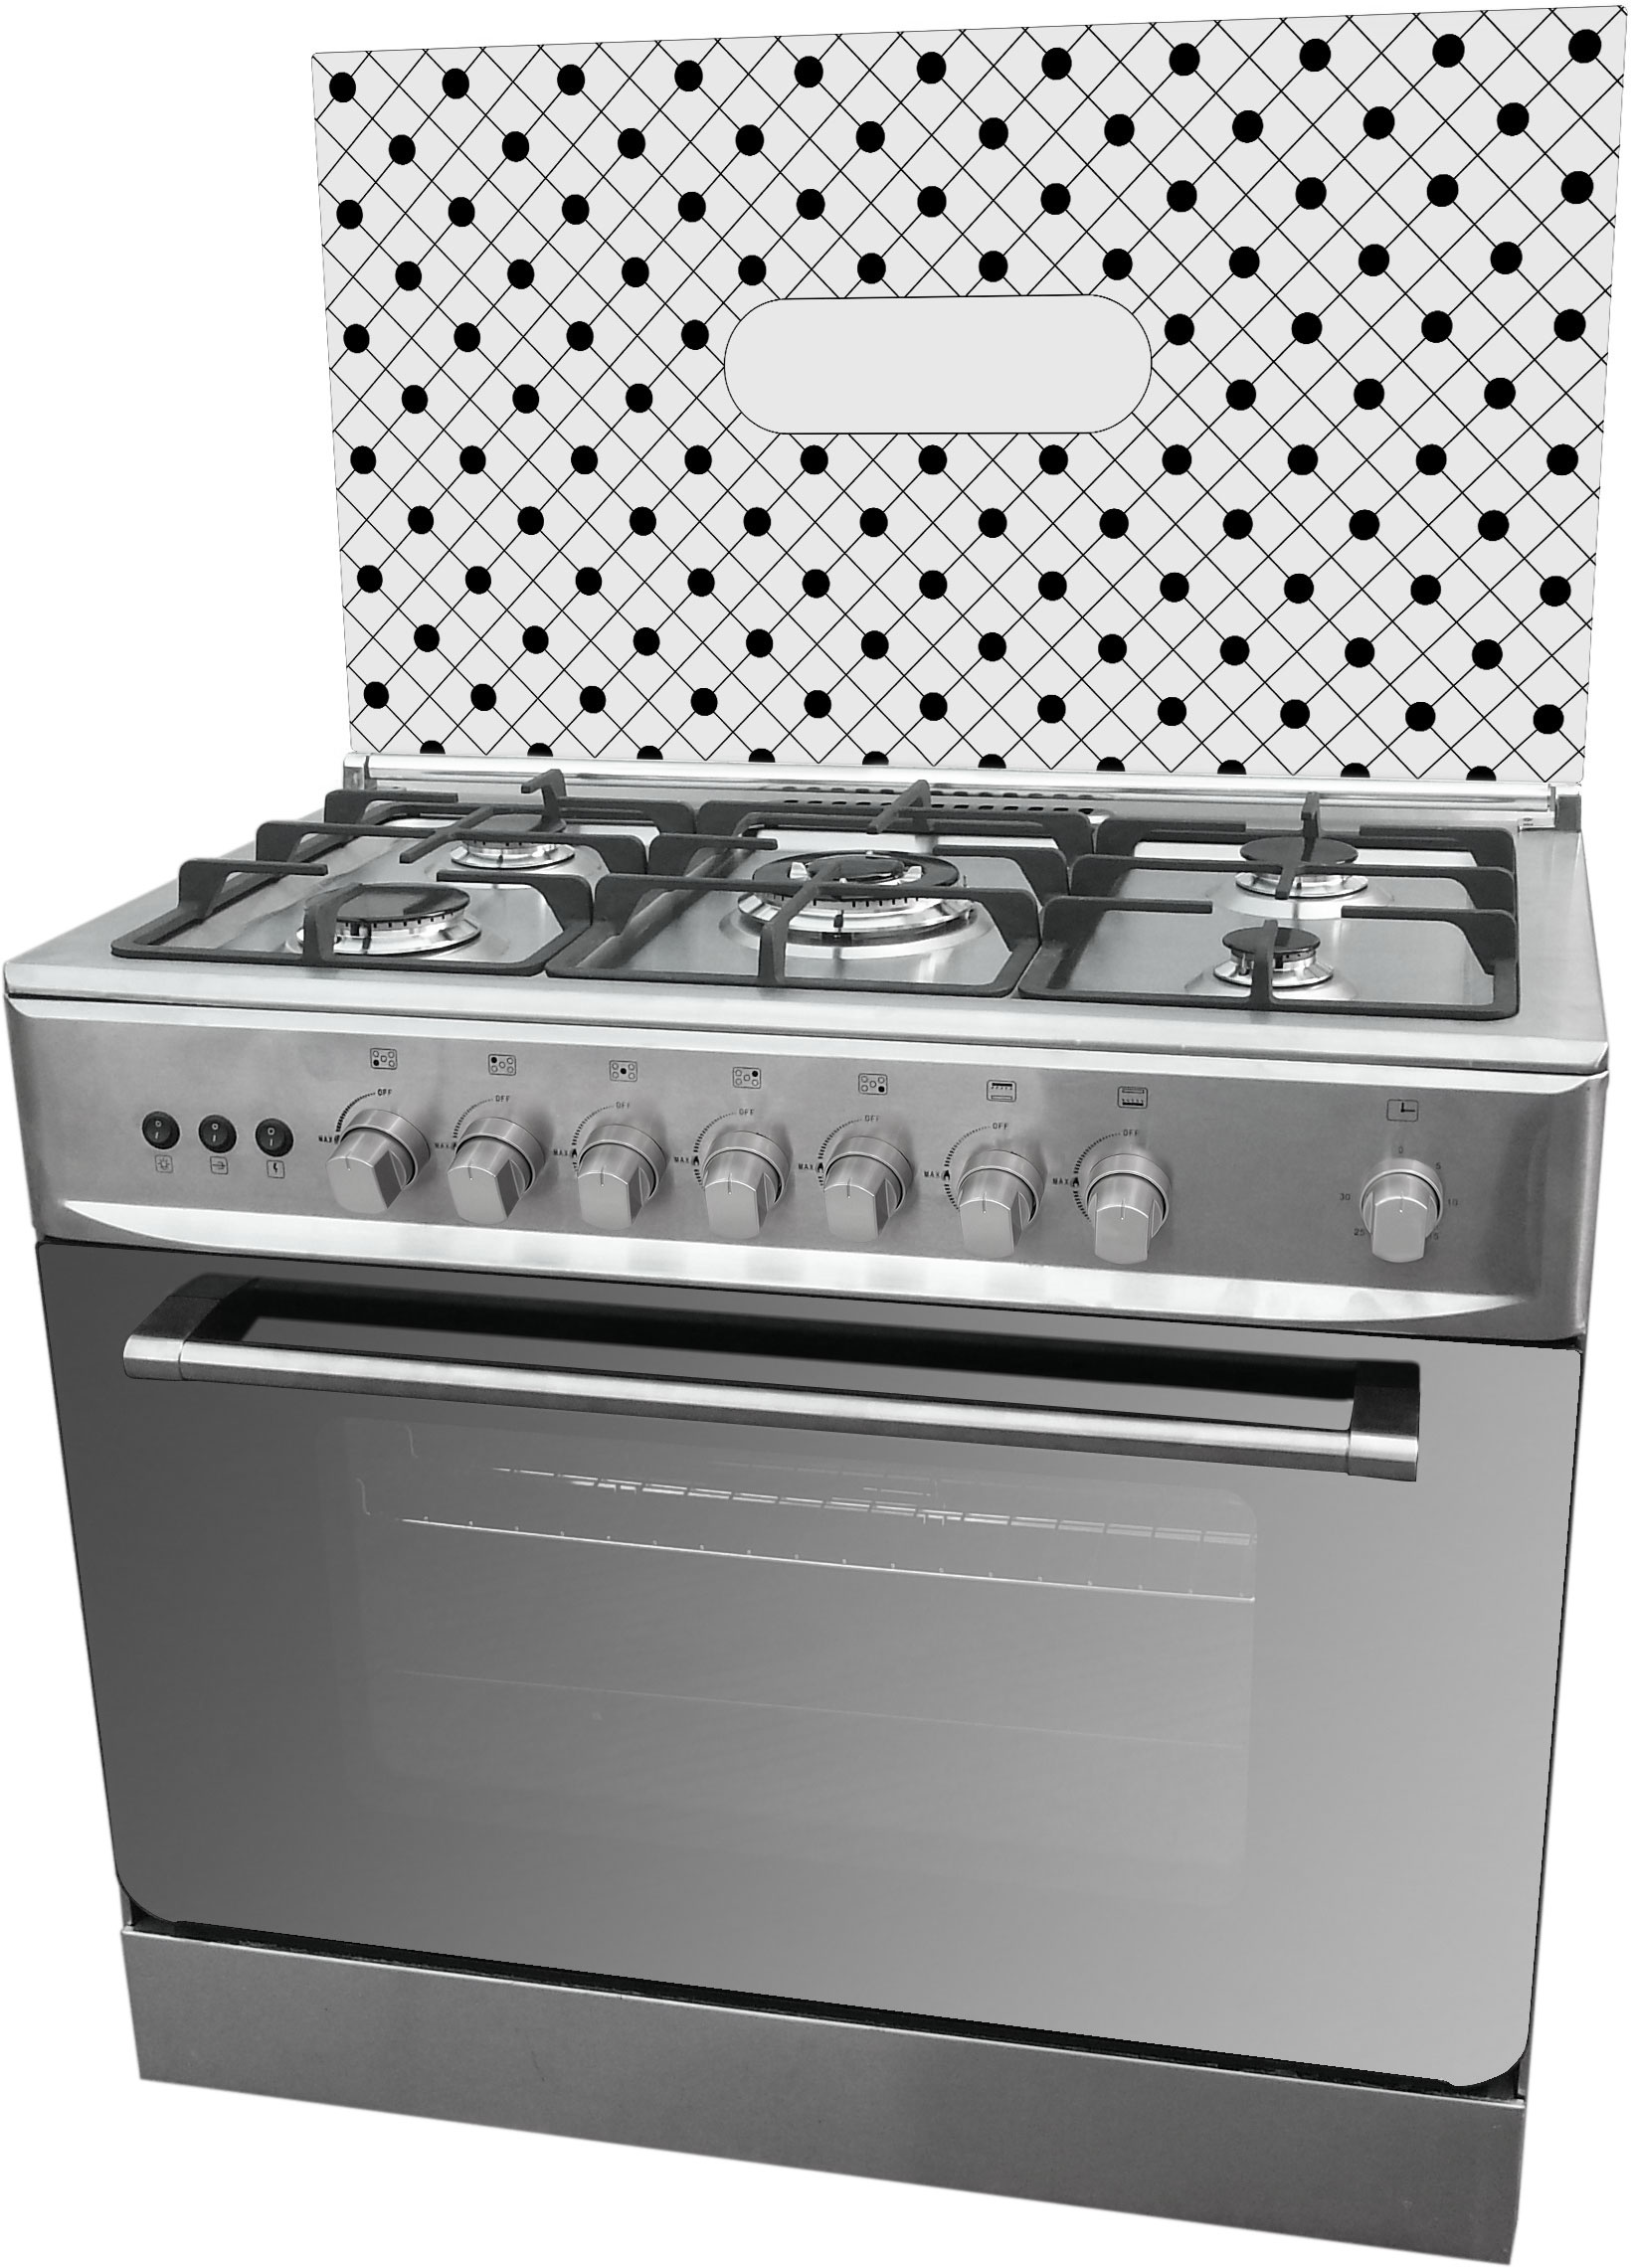 What’s the difference between a freestanding cooker and a stove?